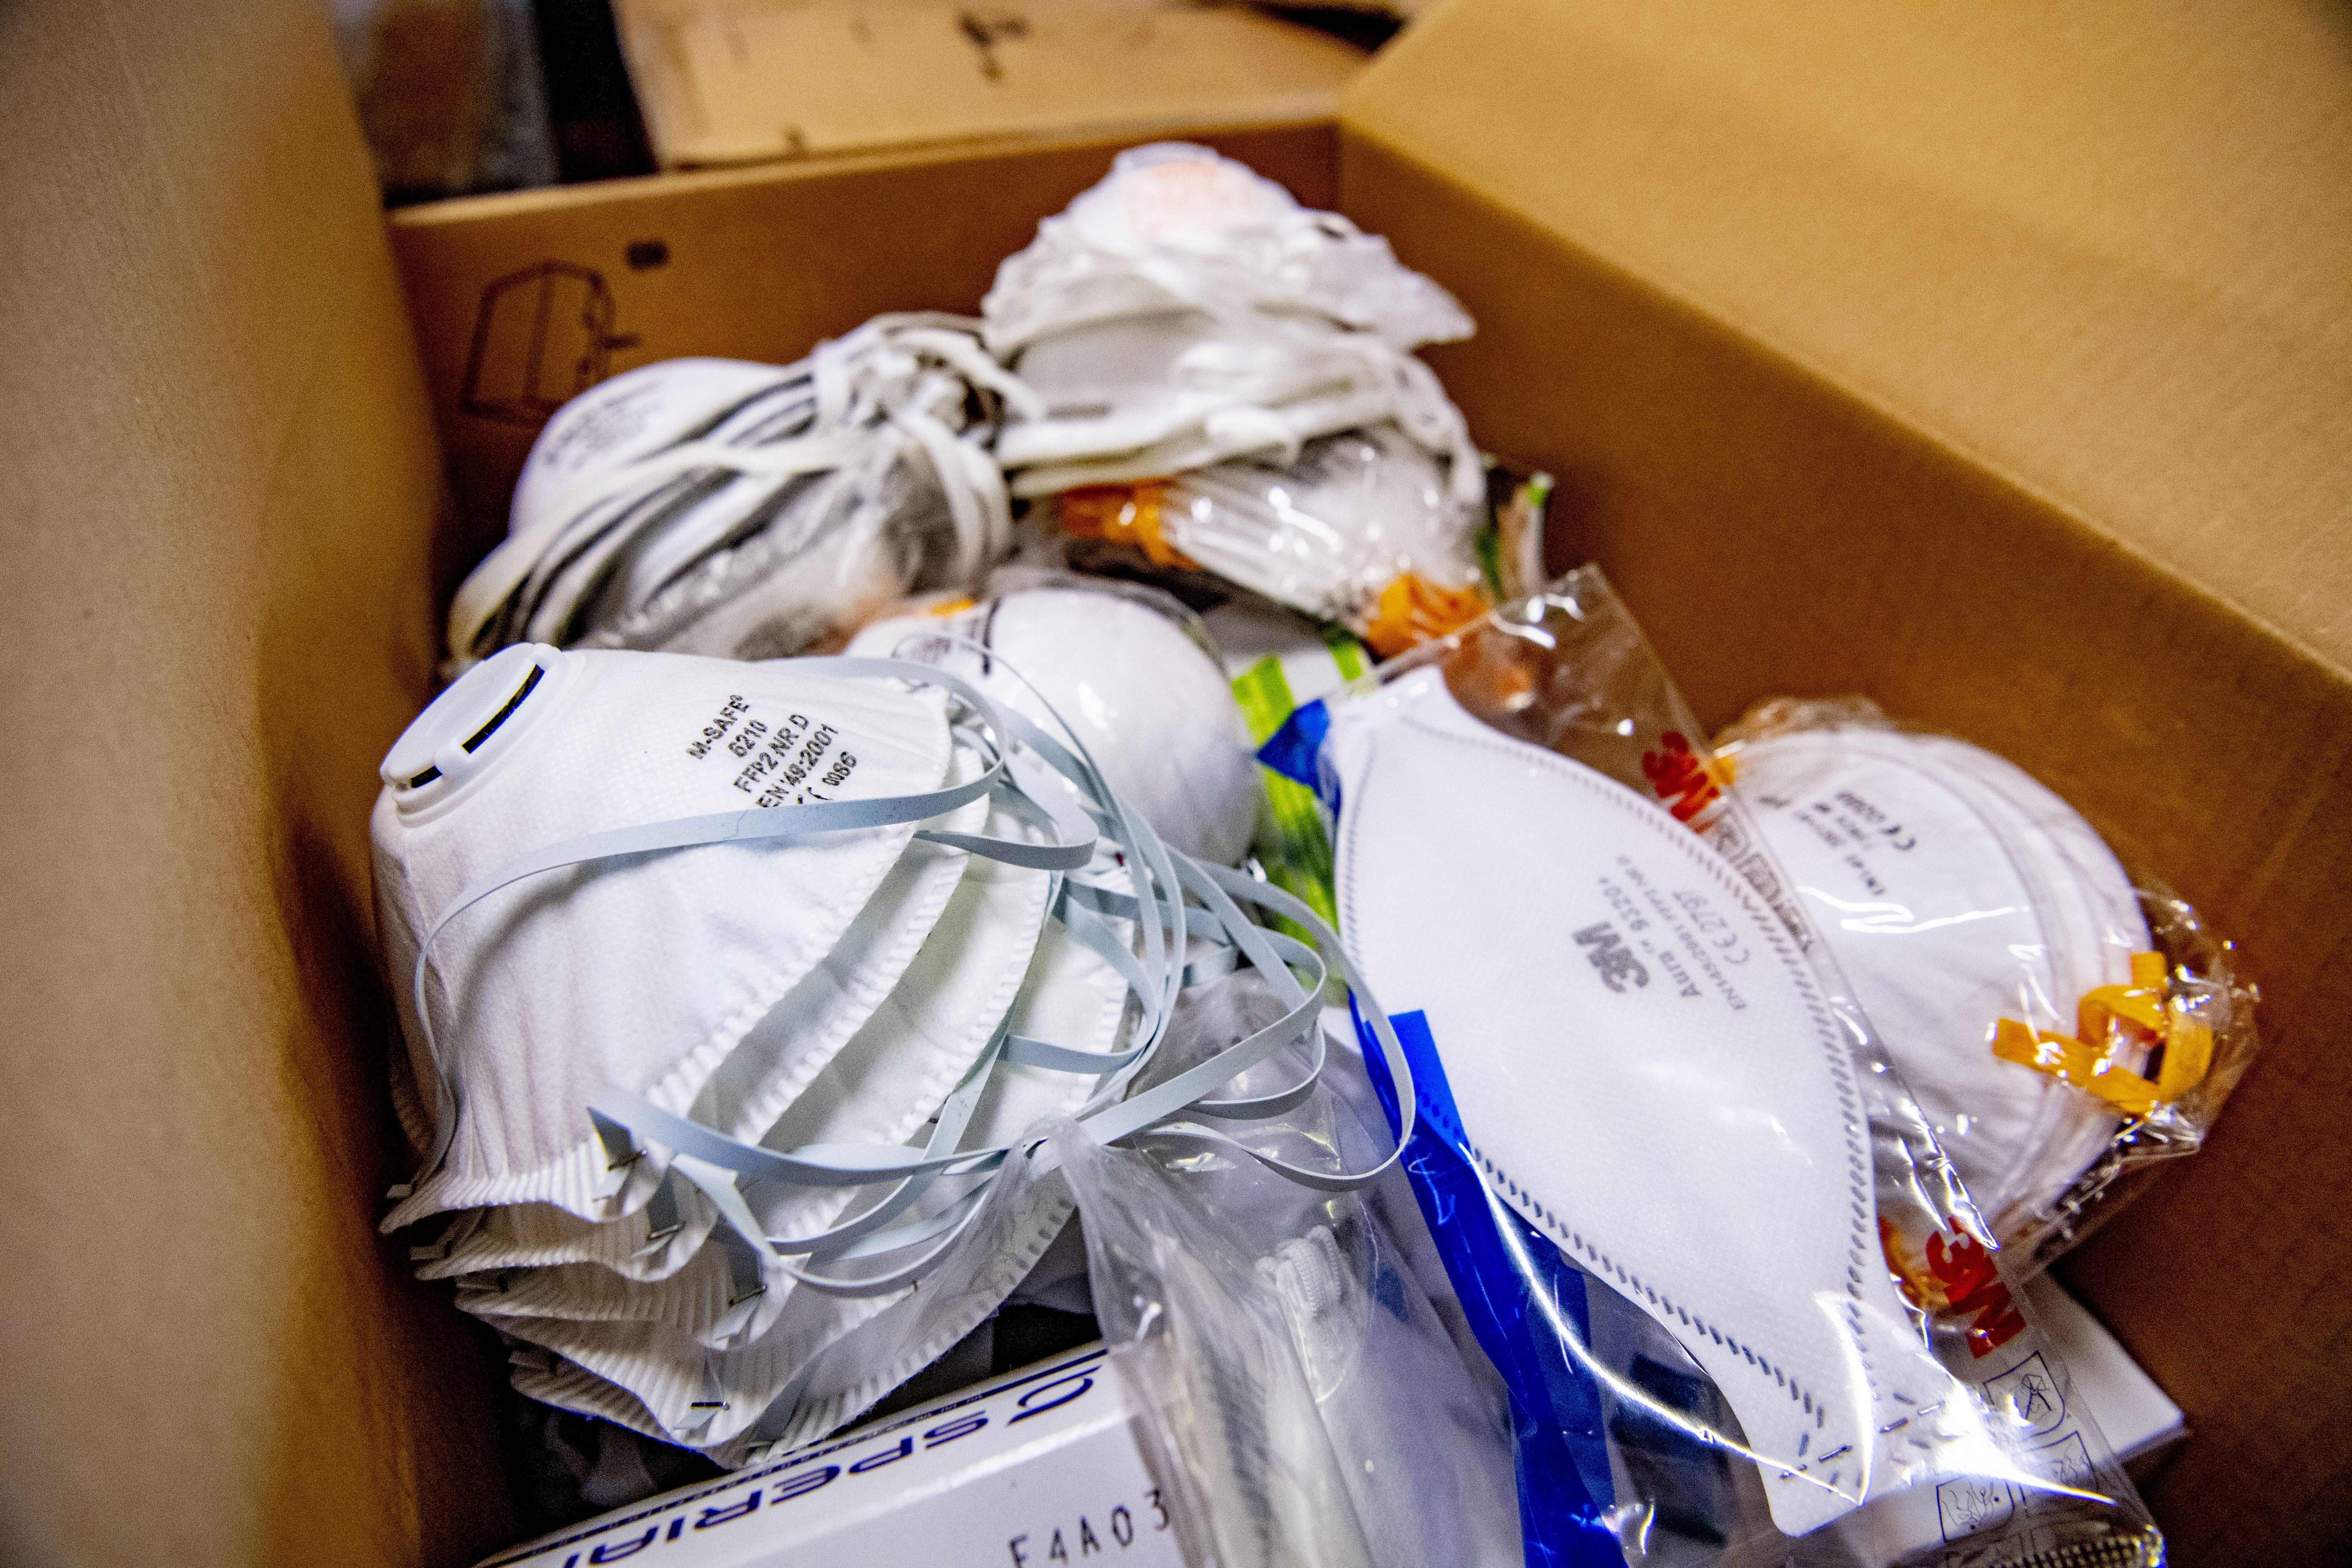 Protective face masks are pictured in a box (Photo by ROBIN UTRECHT/ANP/AFP via Getty Images)